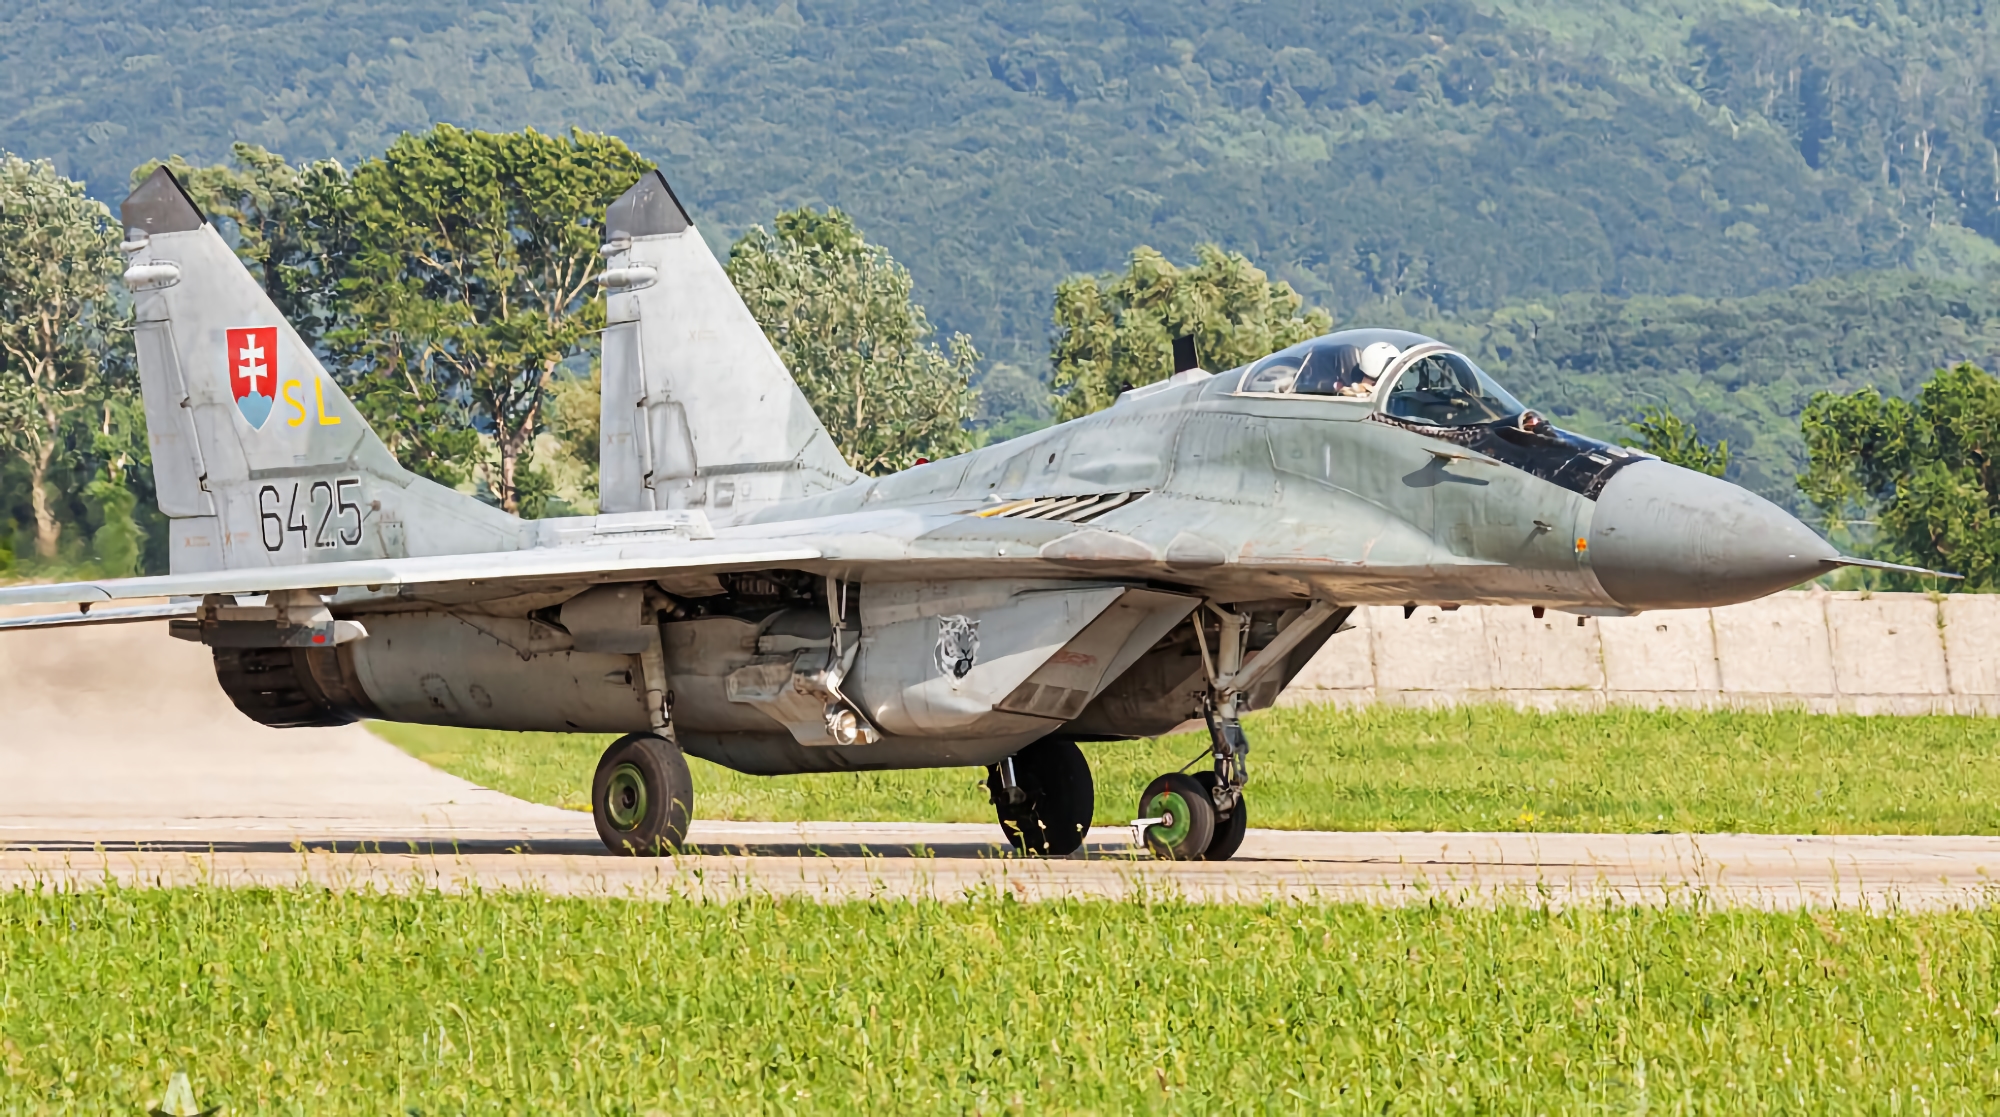 Slovakia to hand over its MiG-29 fighters to Ukraine in September